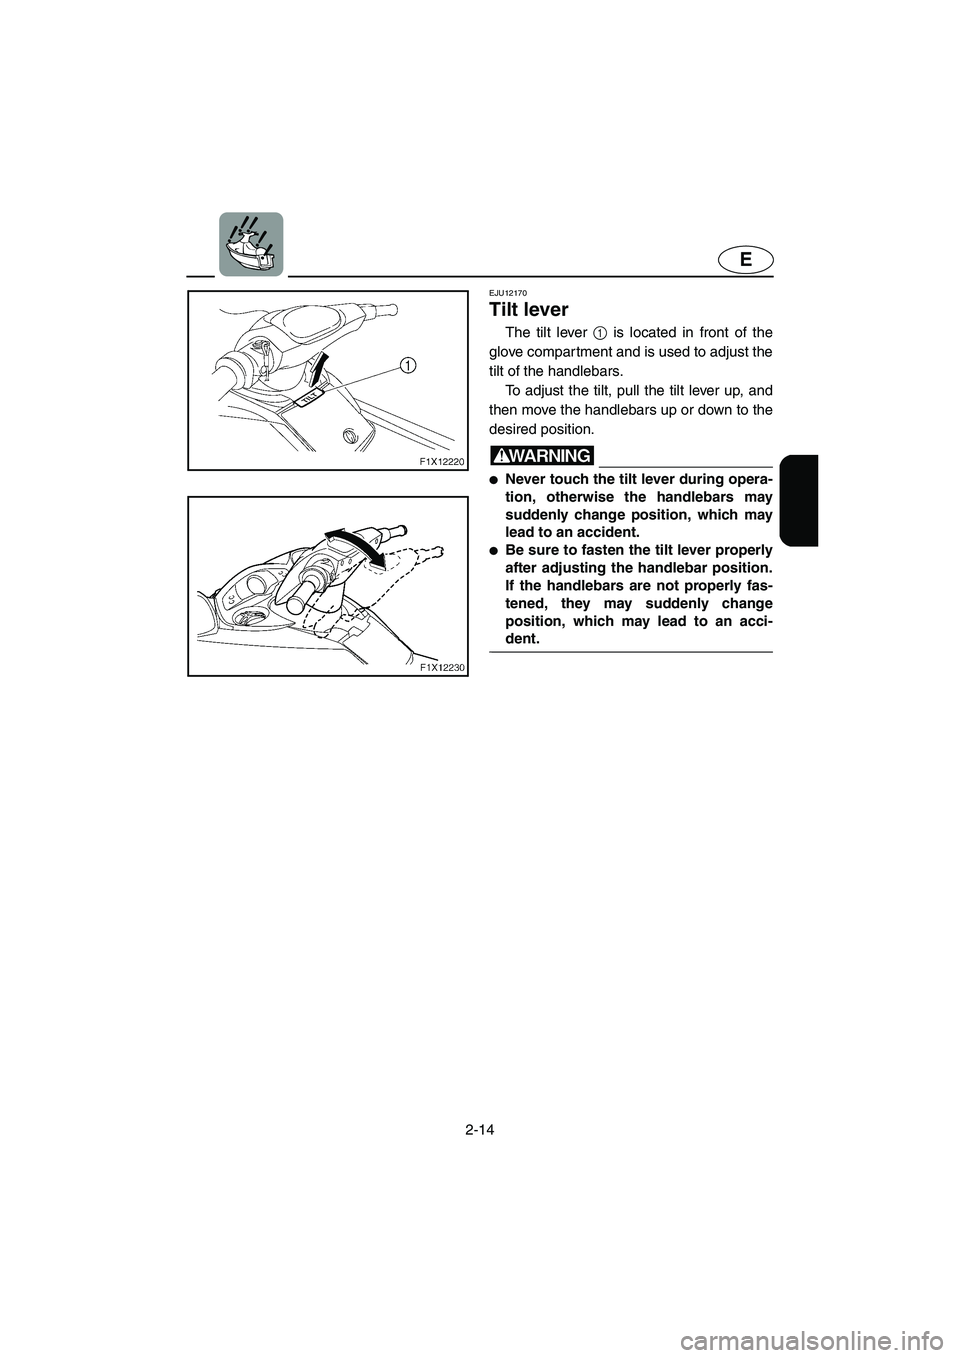 YAMAHA FX HO 2006  Owners Manual 2-14
E
EJU12170 
Tilt lever  
The tilt lever 1 is located in front of the
glove compartment and is used to adjust the
tilt of the handlebars. 
To adjust the tilt, pull the tilt lever up, and
then move